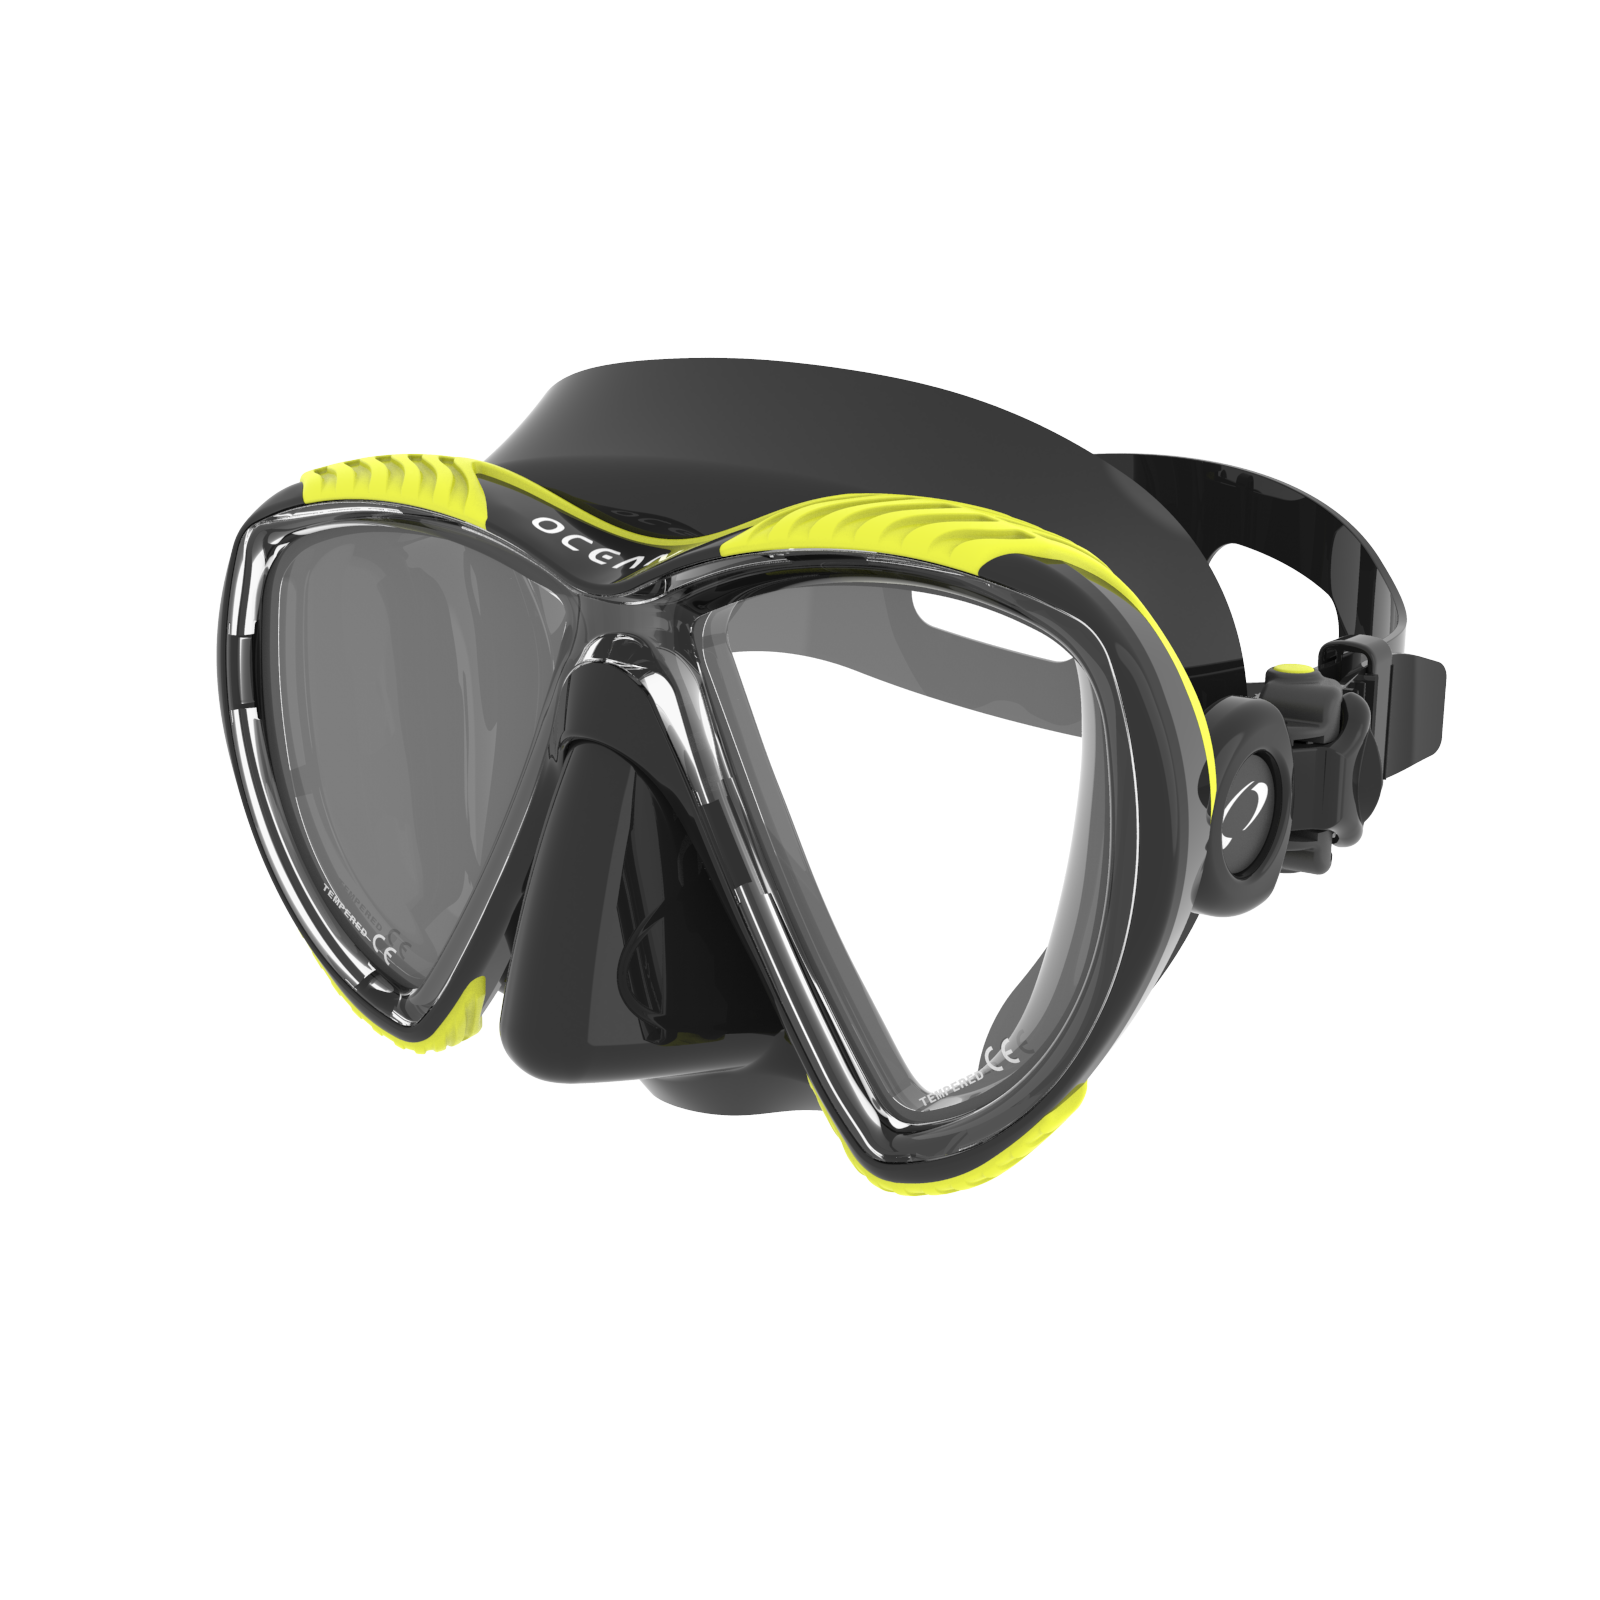 Oceanic Discovery Dual Lens Dive Mask-BK/YELLOW